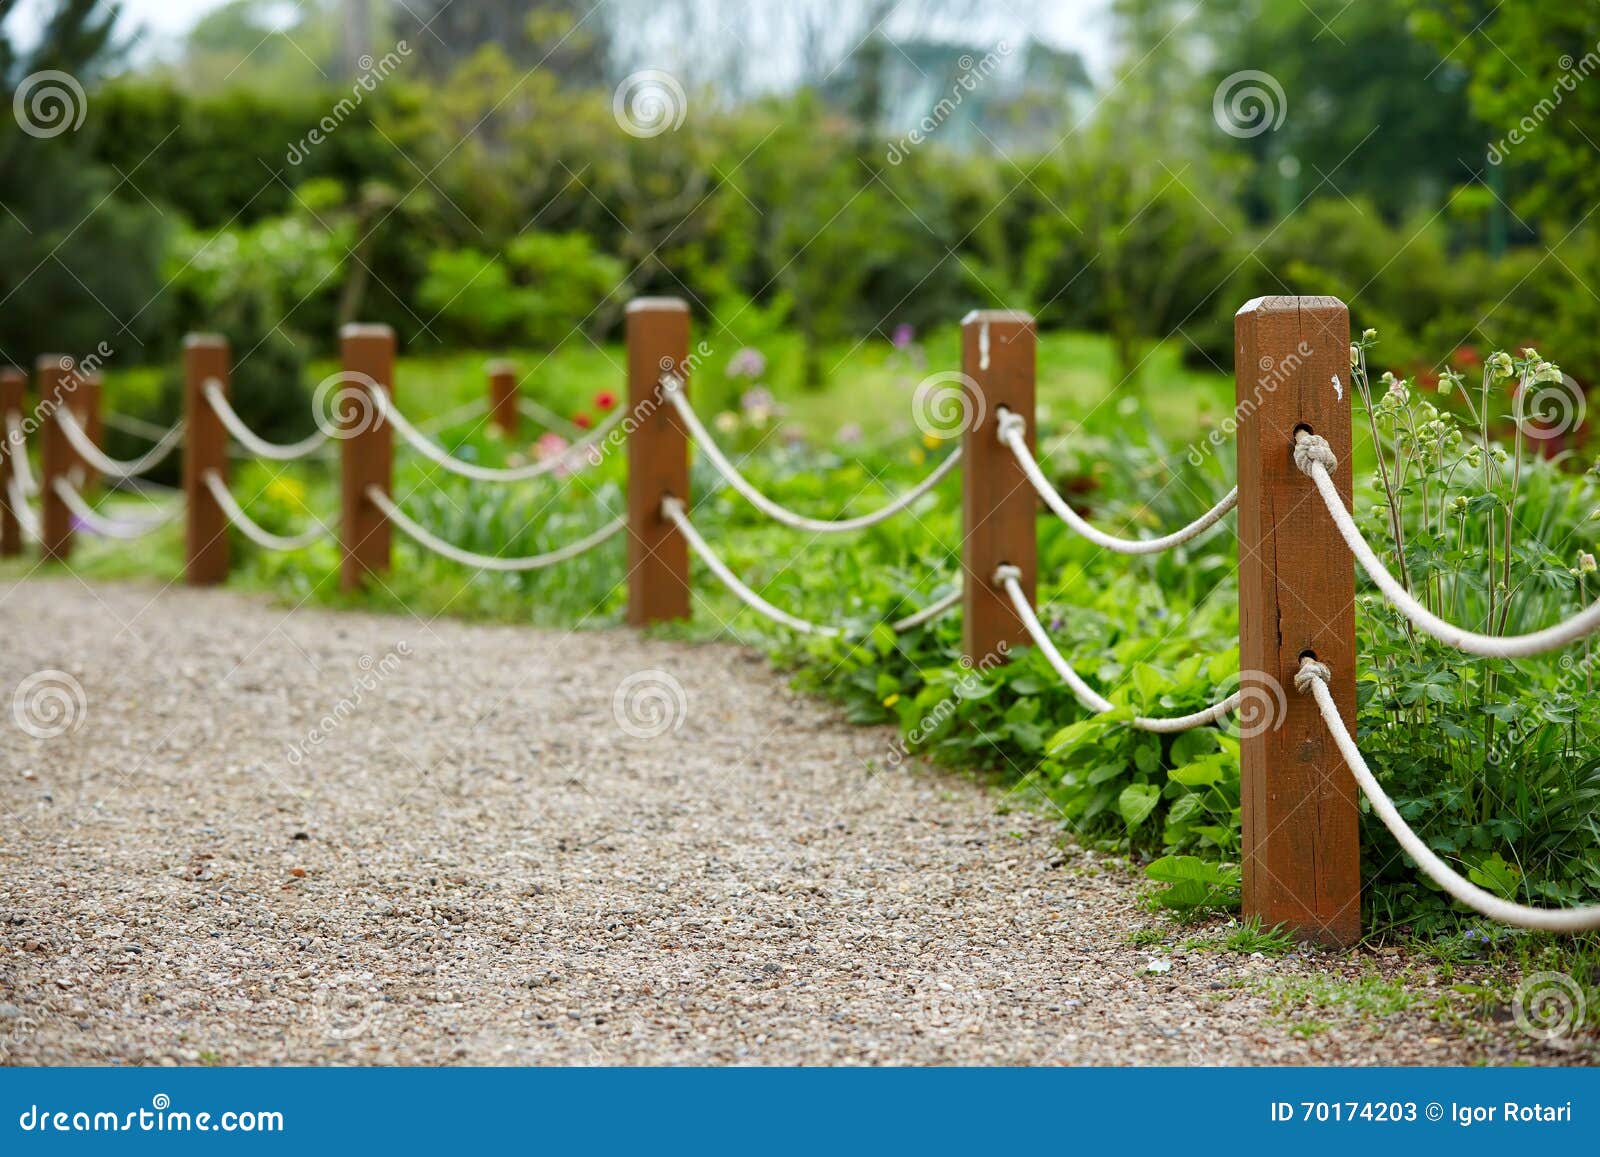 Park rope fence stock image. Image of seaside, rope, nature - 70174203